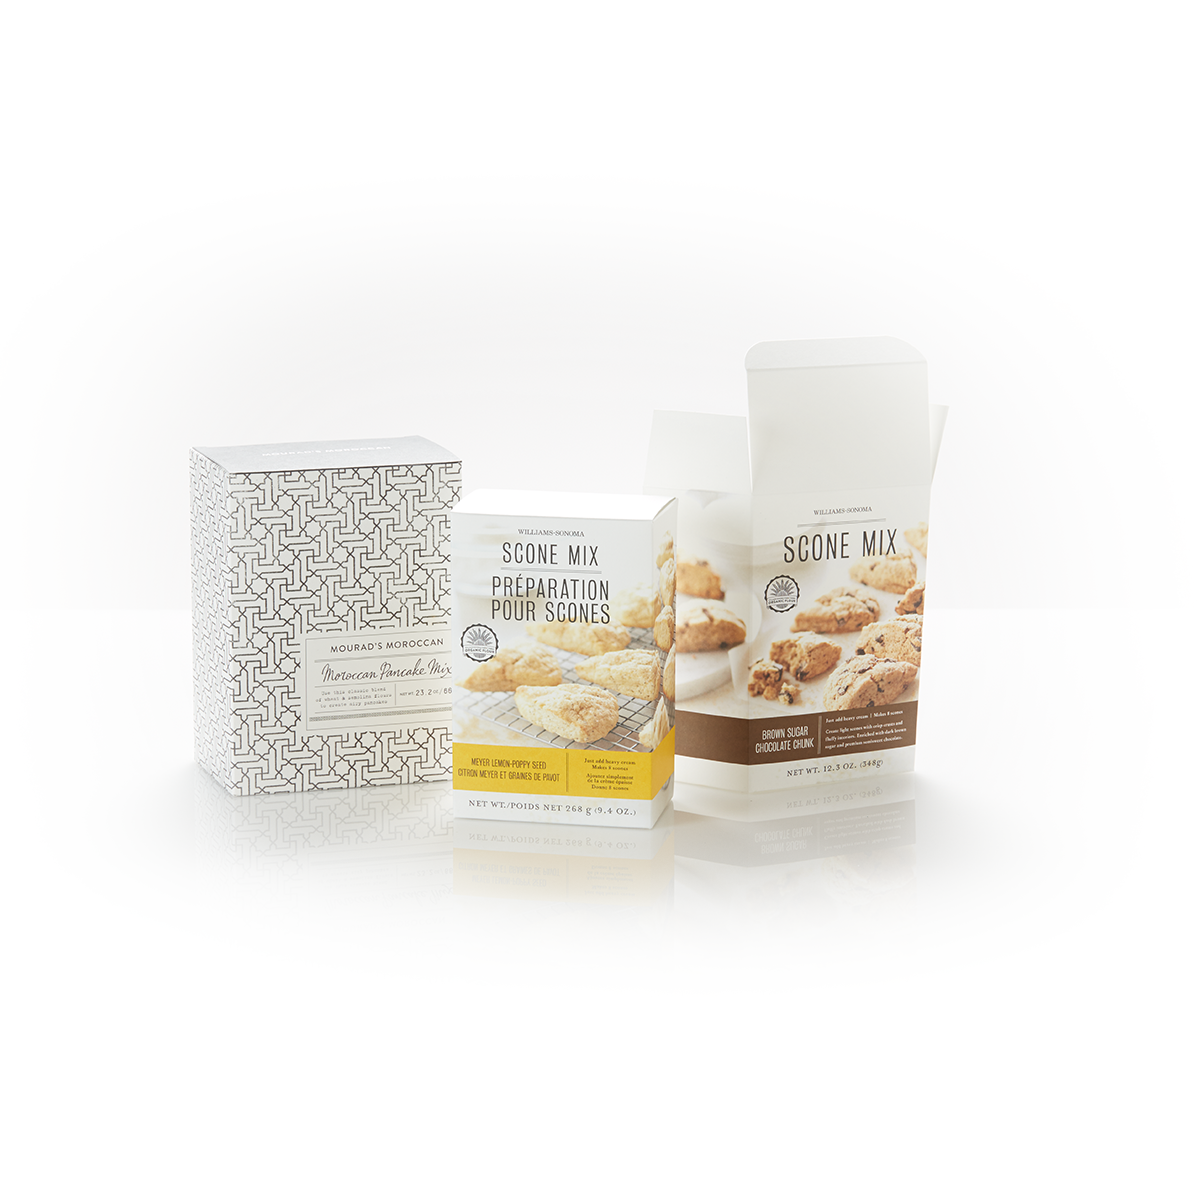 Sonoma scone mix packaging